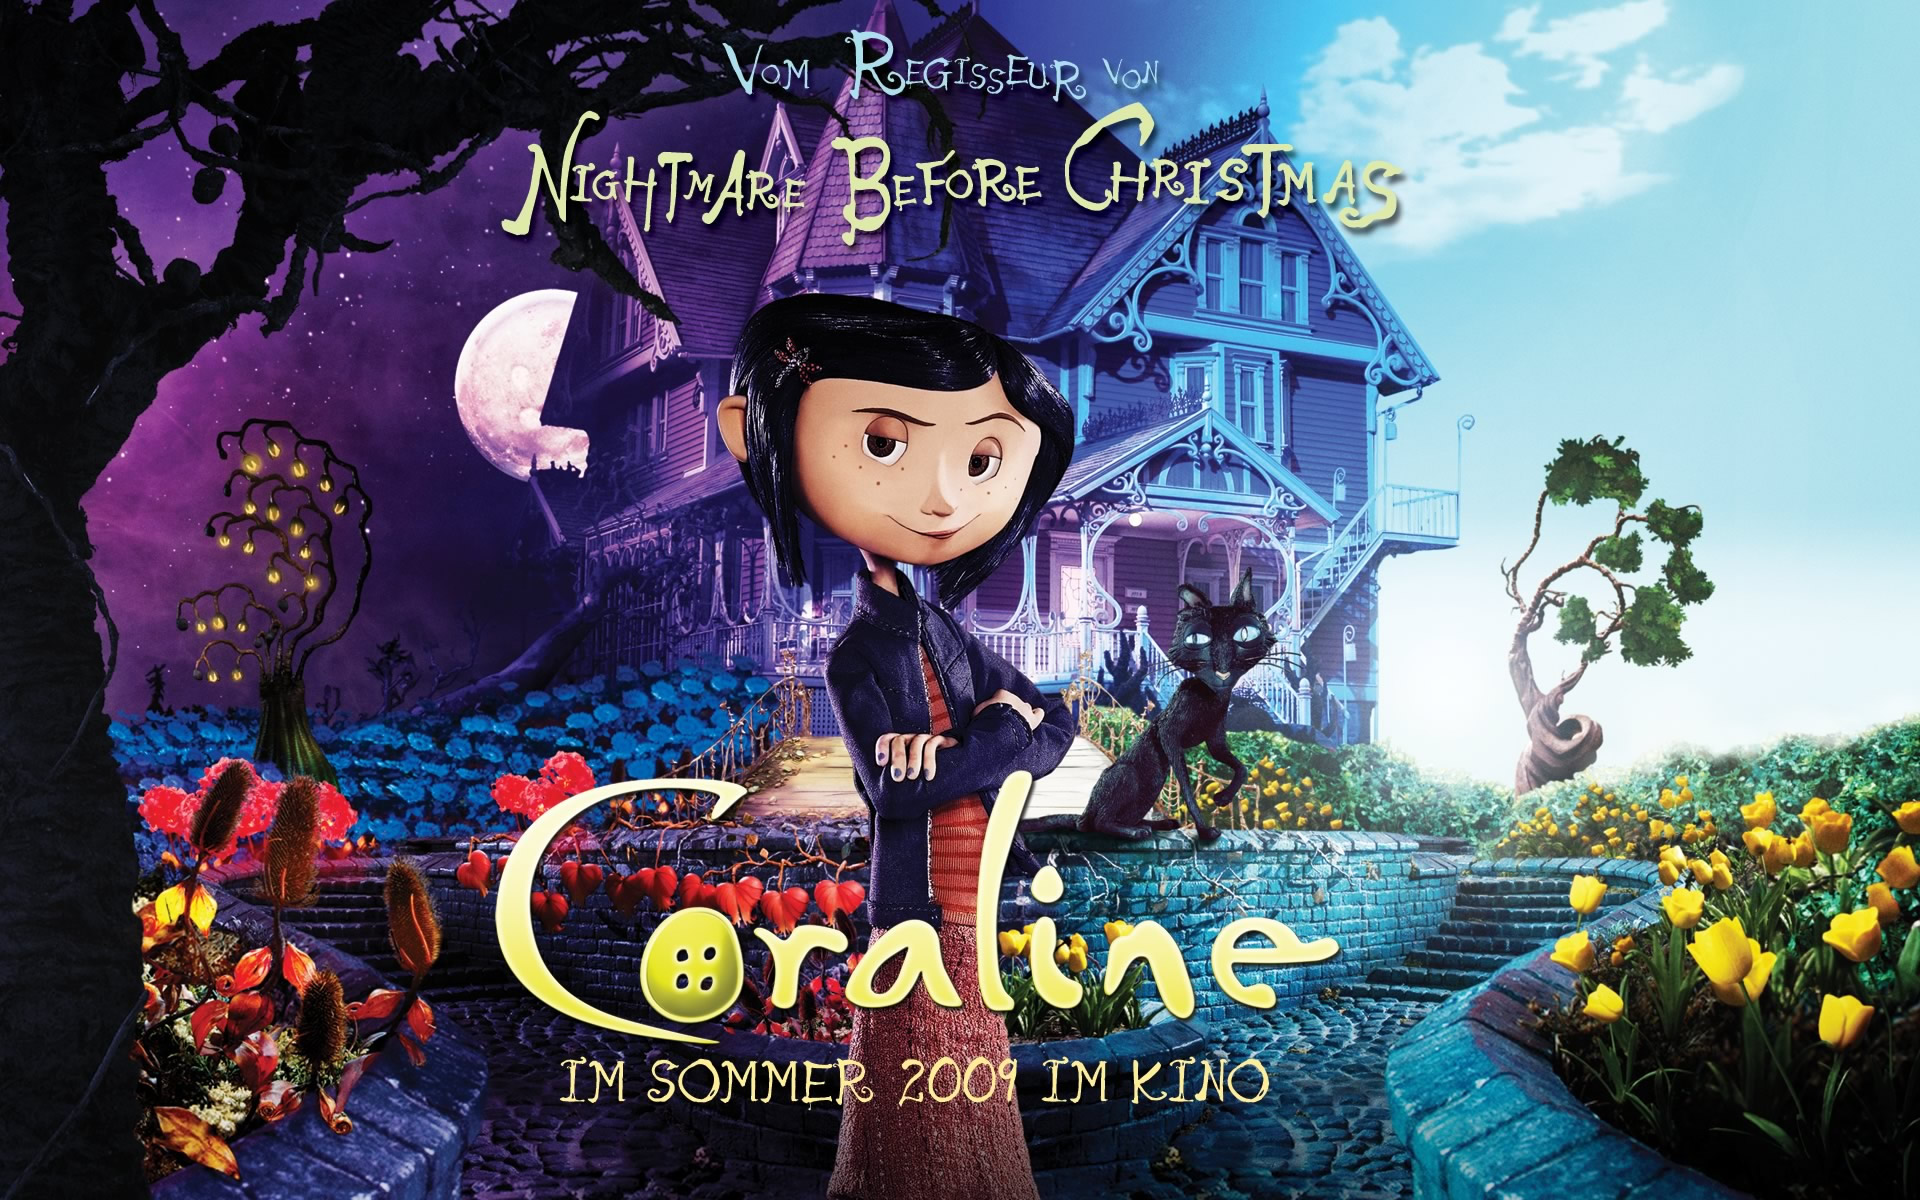 825x1092px #991910 Coraline (148.96 KB) | 11.09.2015 | By Ronin